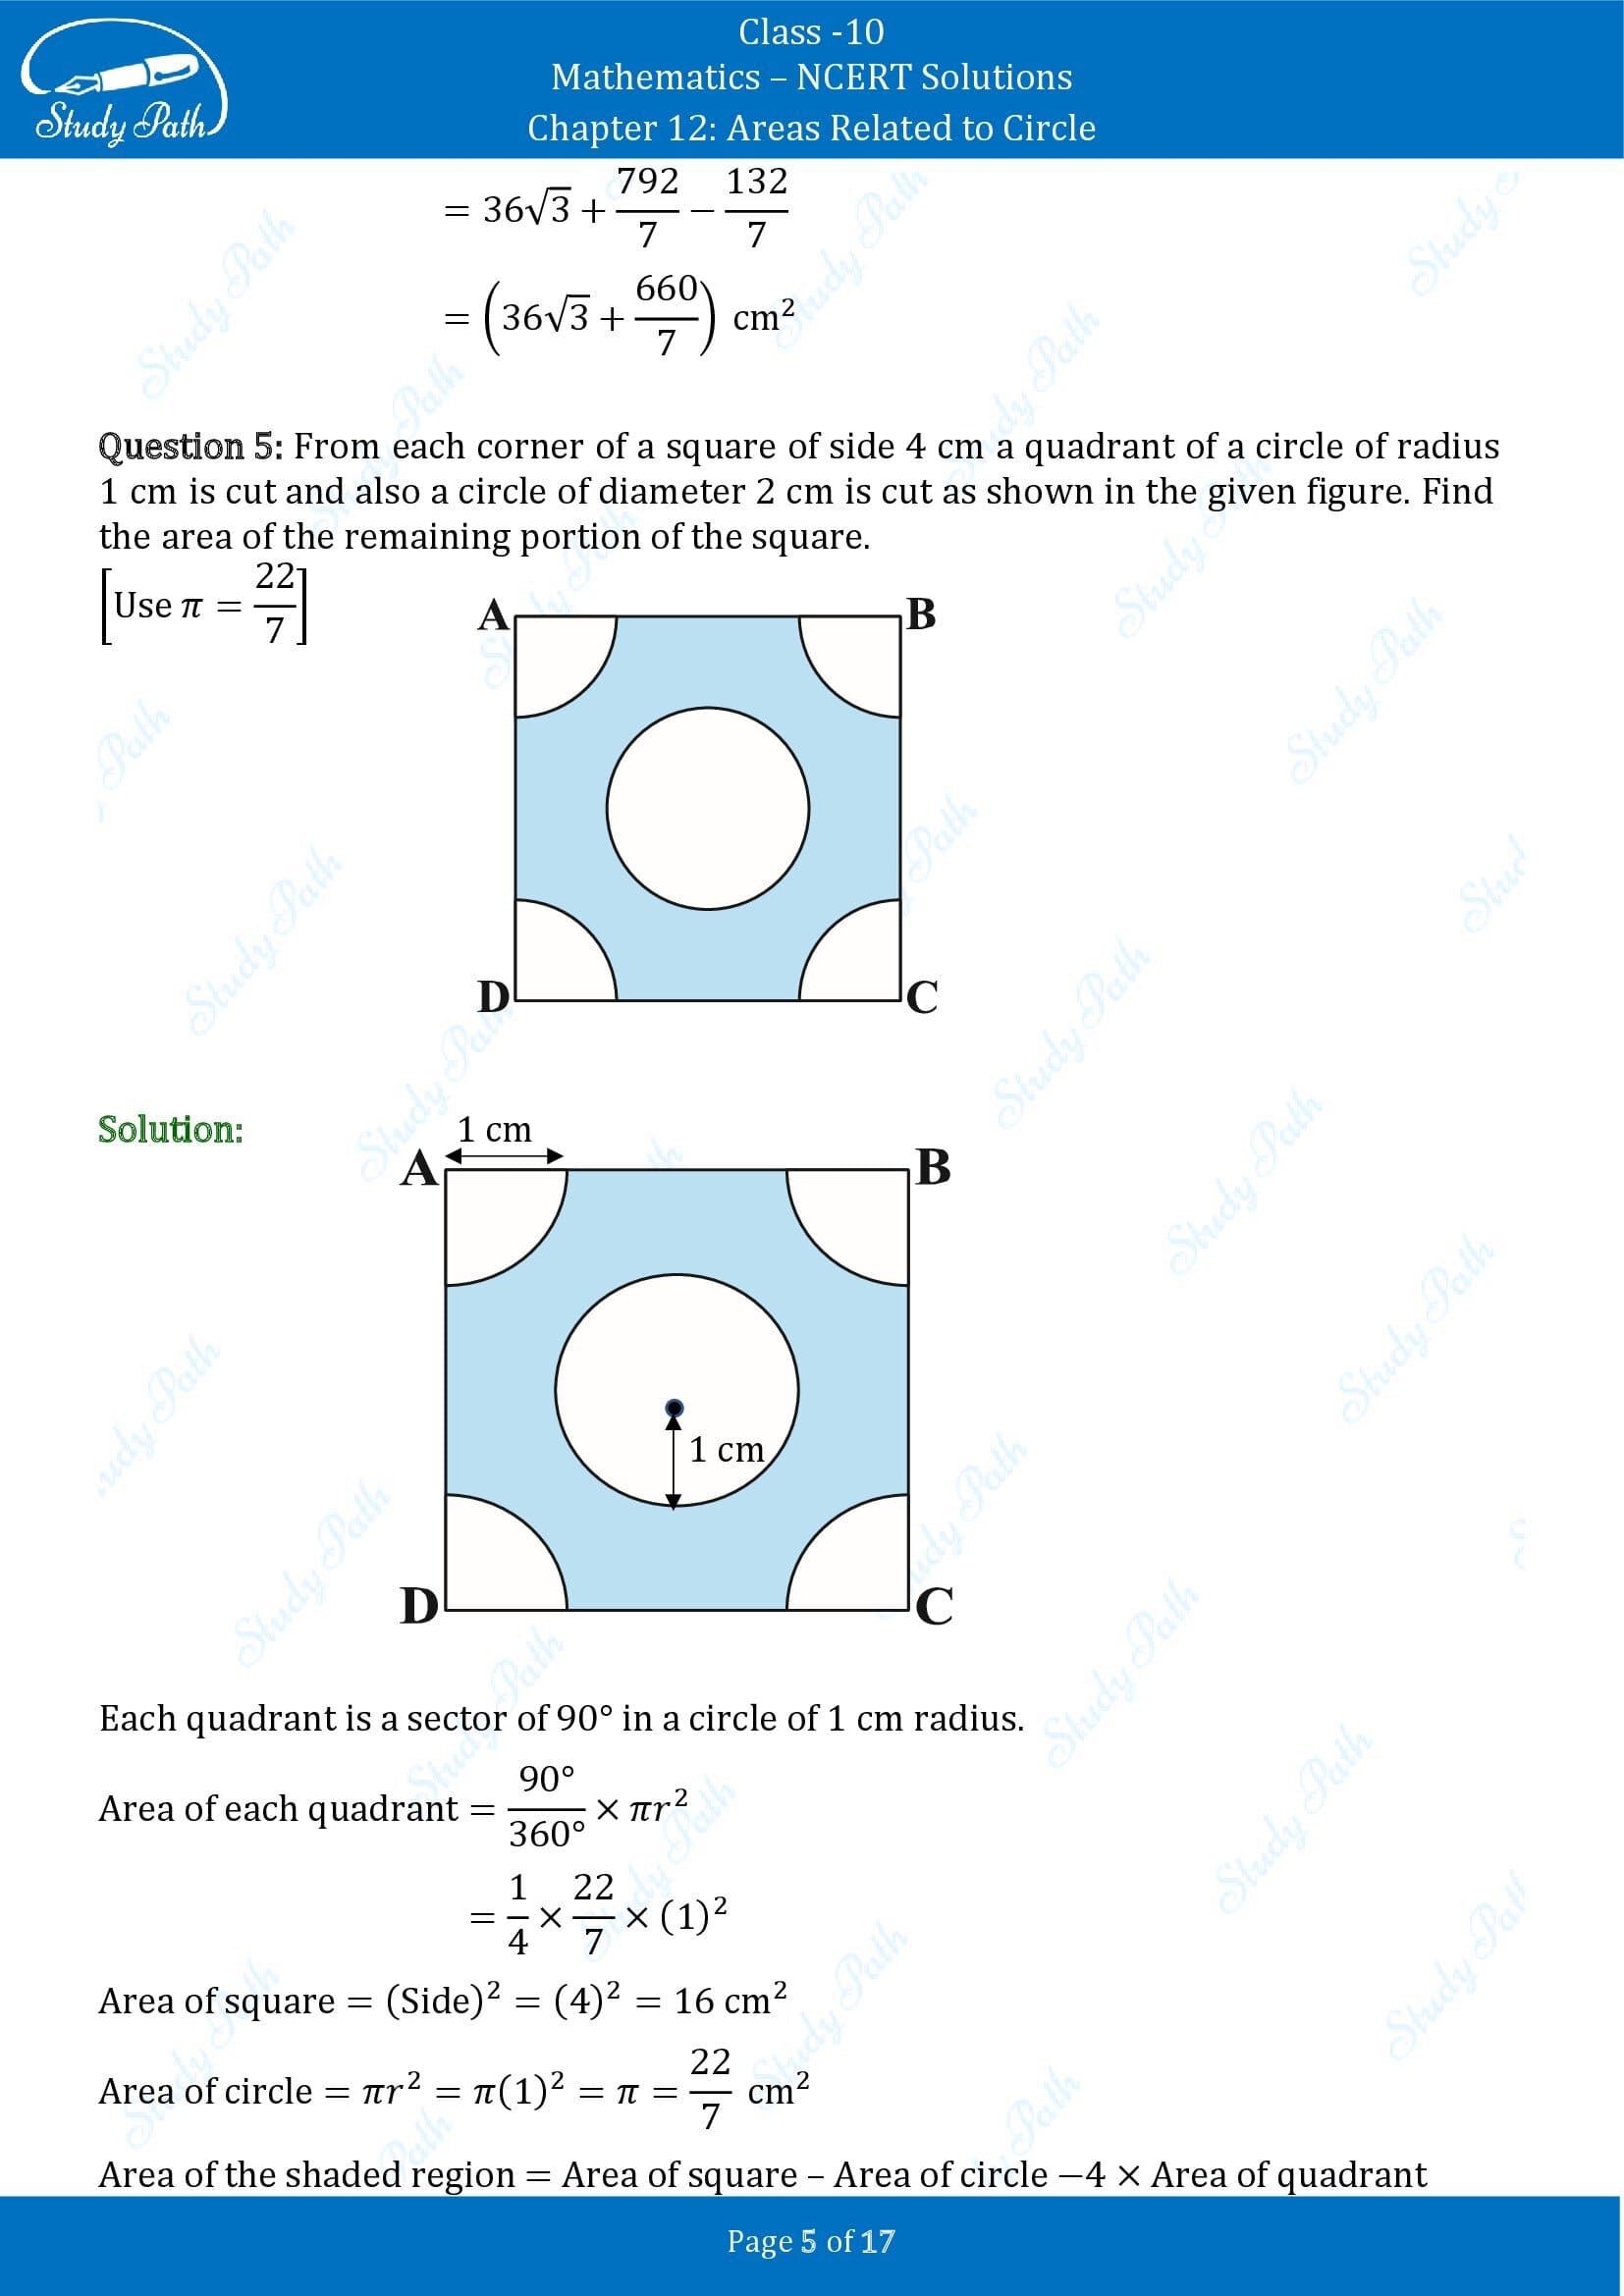 NCERT Solutions for Class 10 Maths Chapter 12 Areas Related to Circles Exercise 12.3 00005